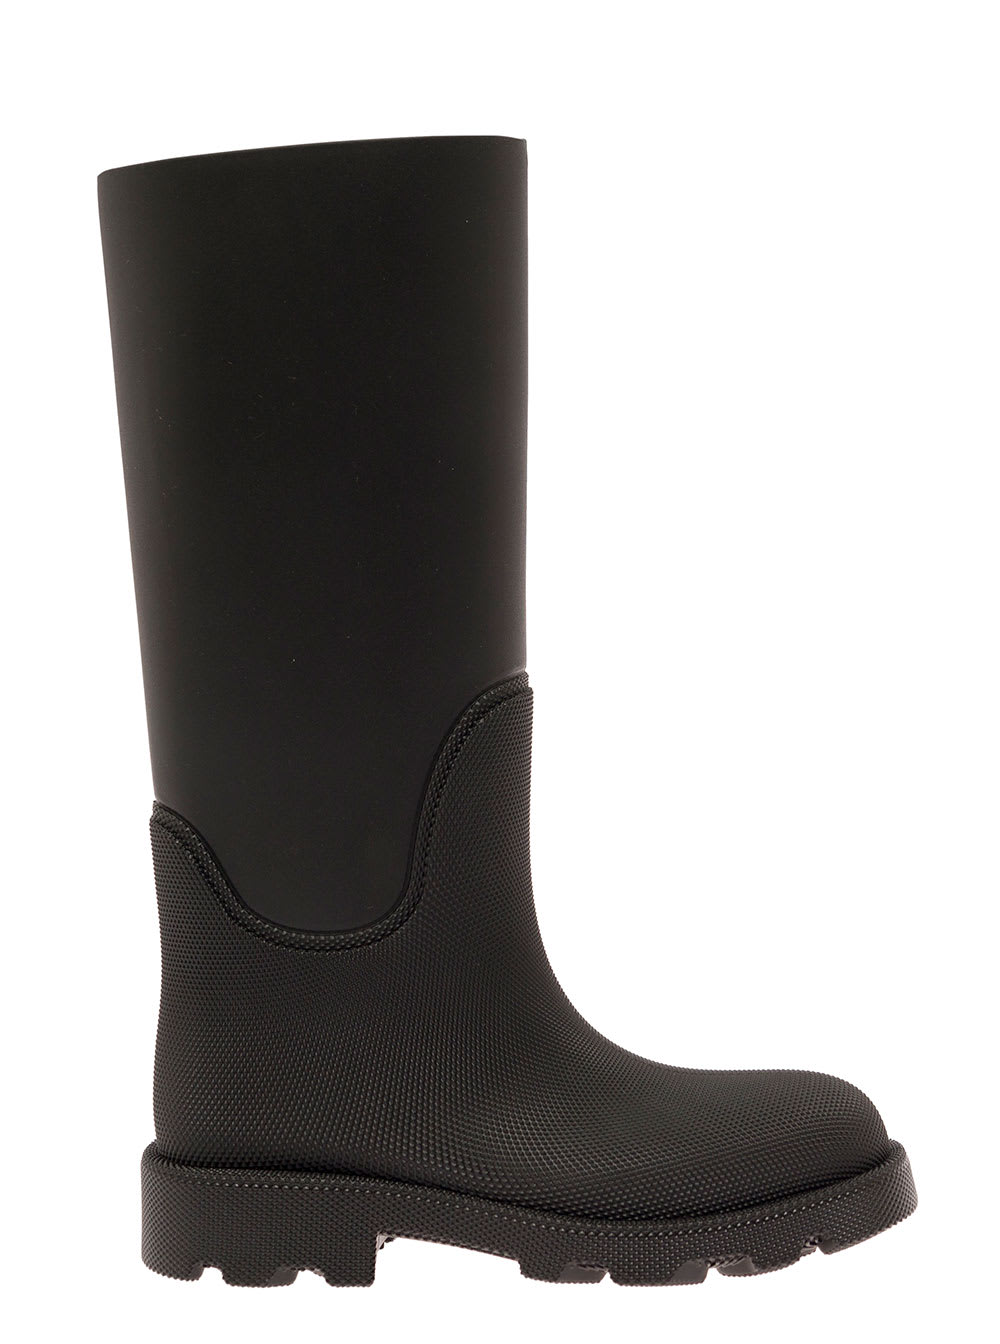 BURBERRY MARSH BLACK RAINBOOTS WITH GRAINED TEXTURE IN RUBBER WOMAN